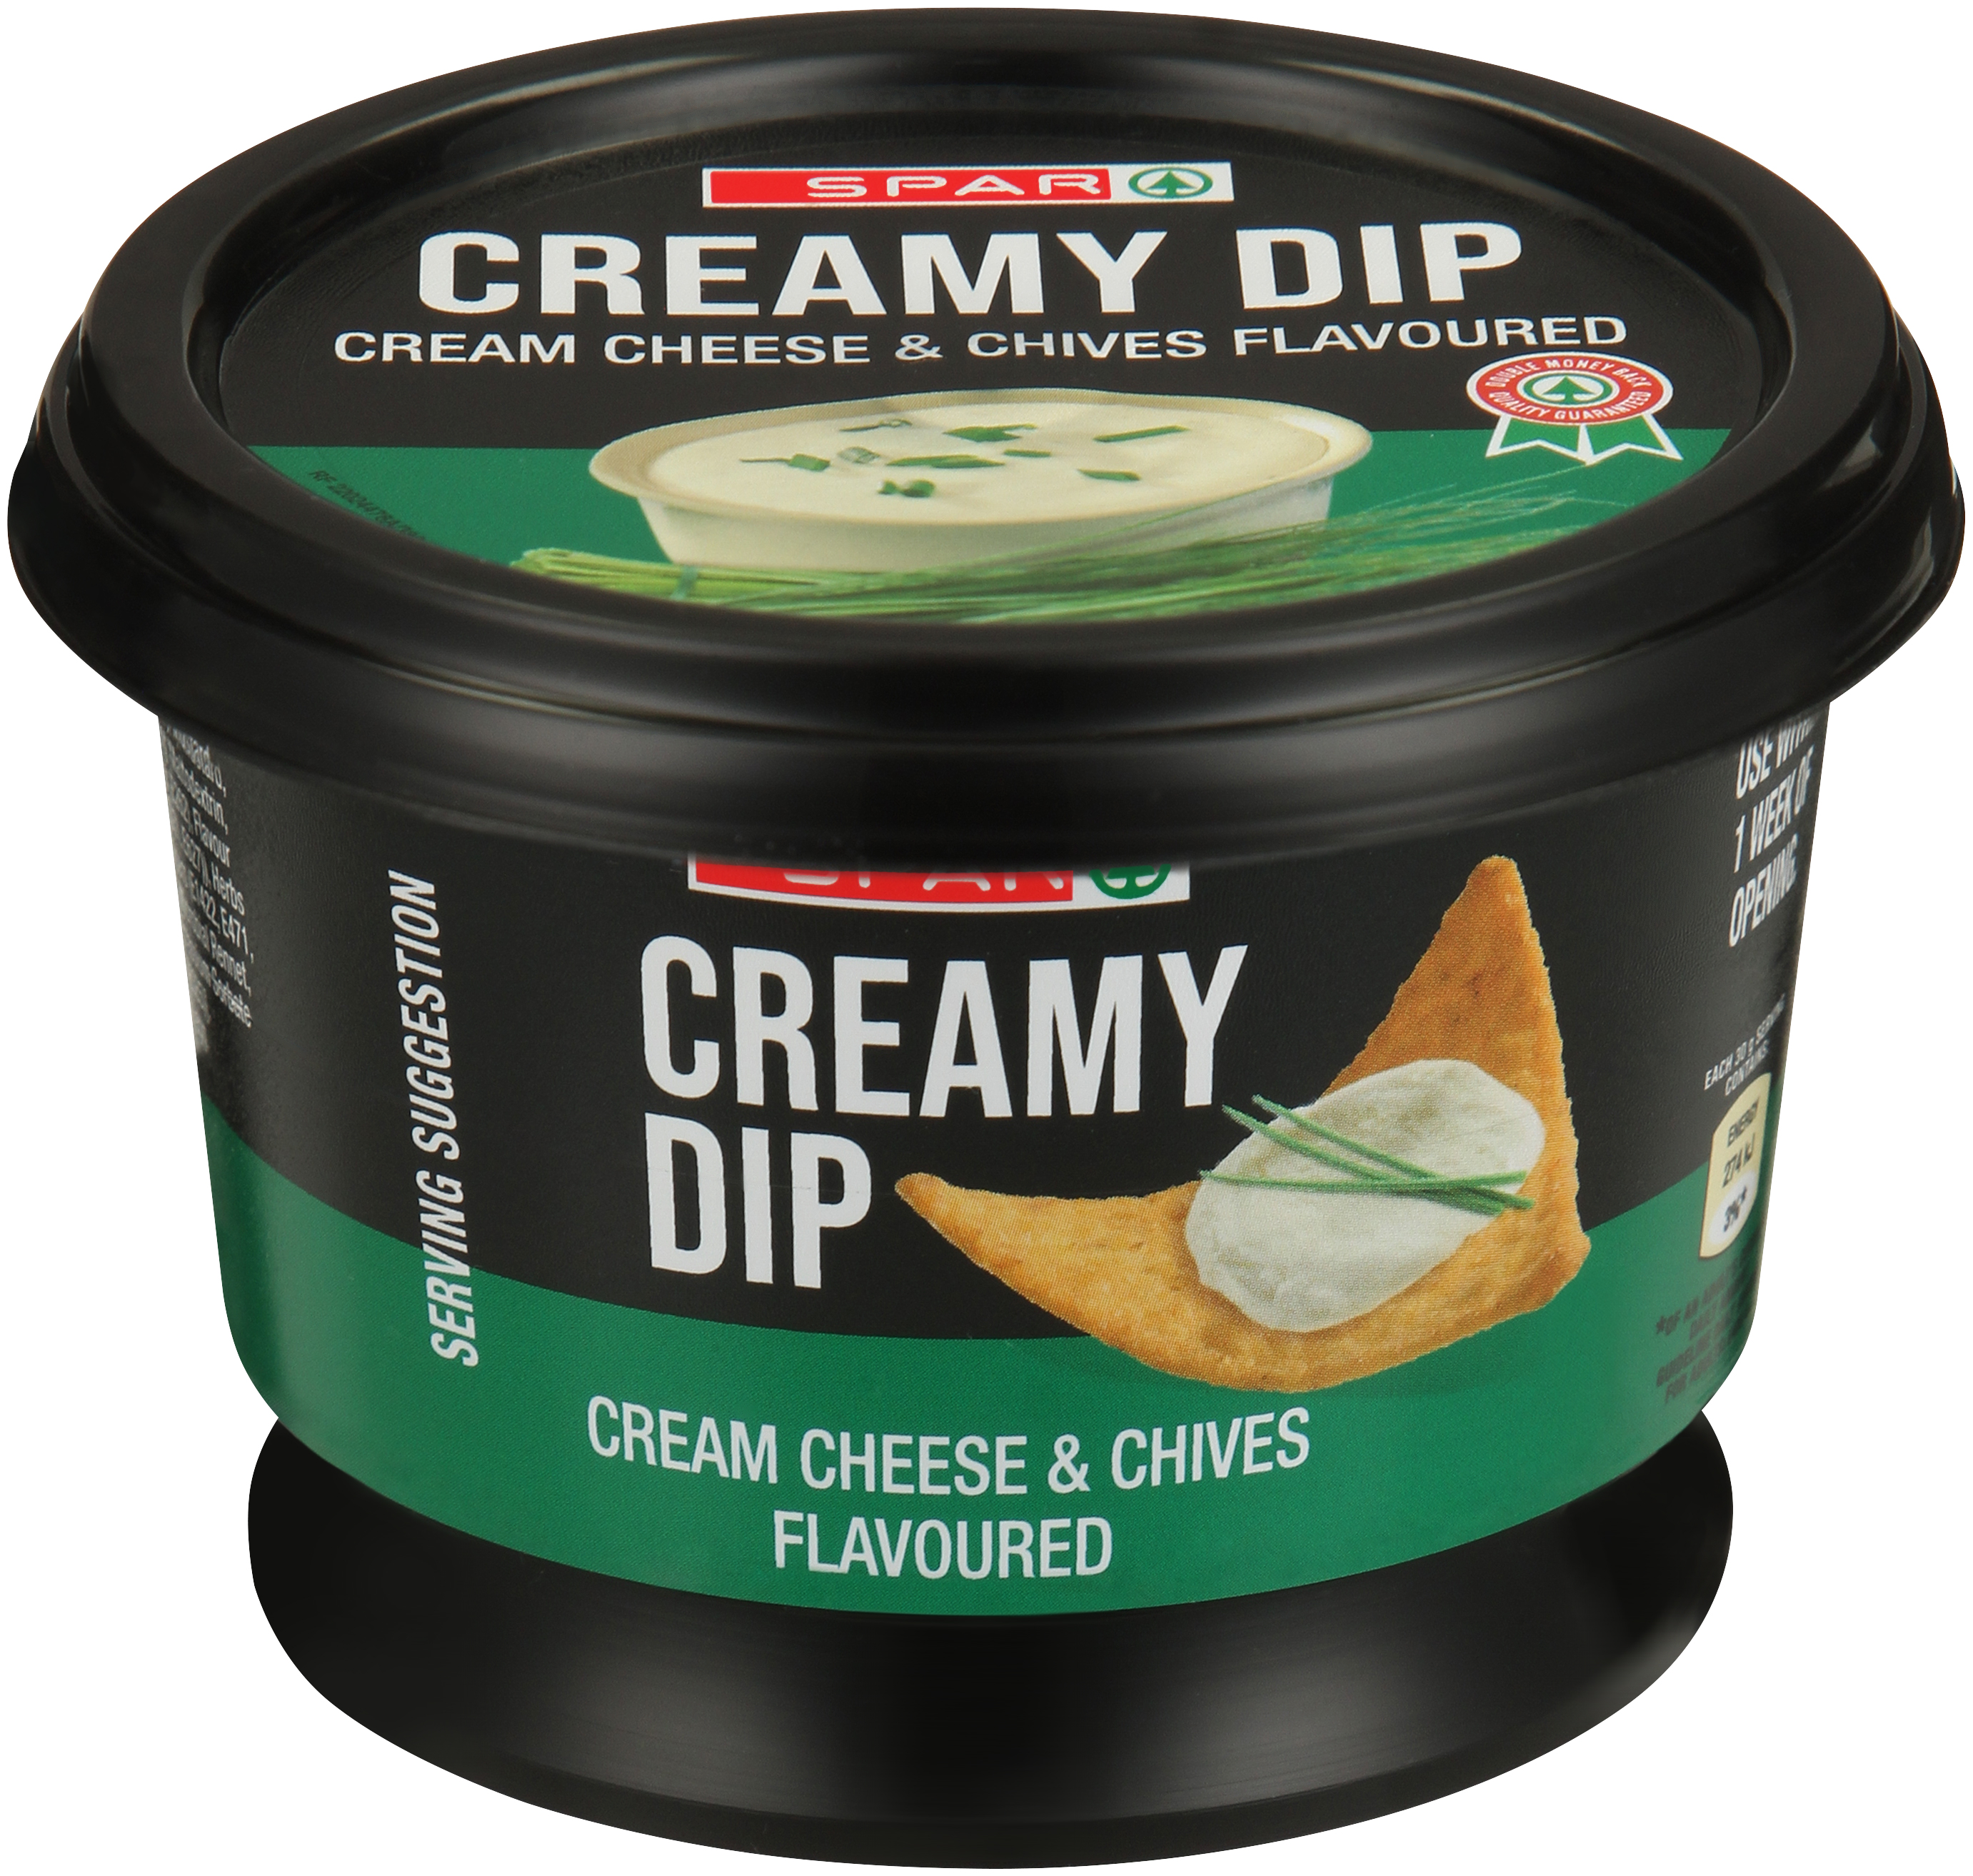 dip - cream cheese and chive flavour